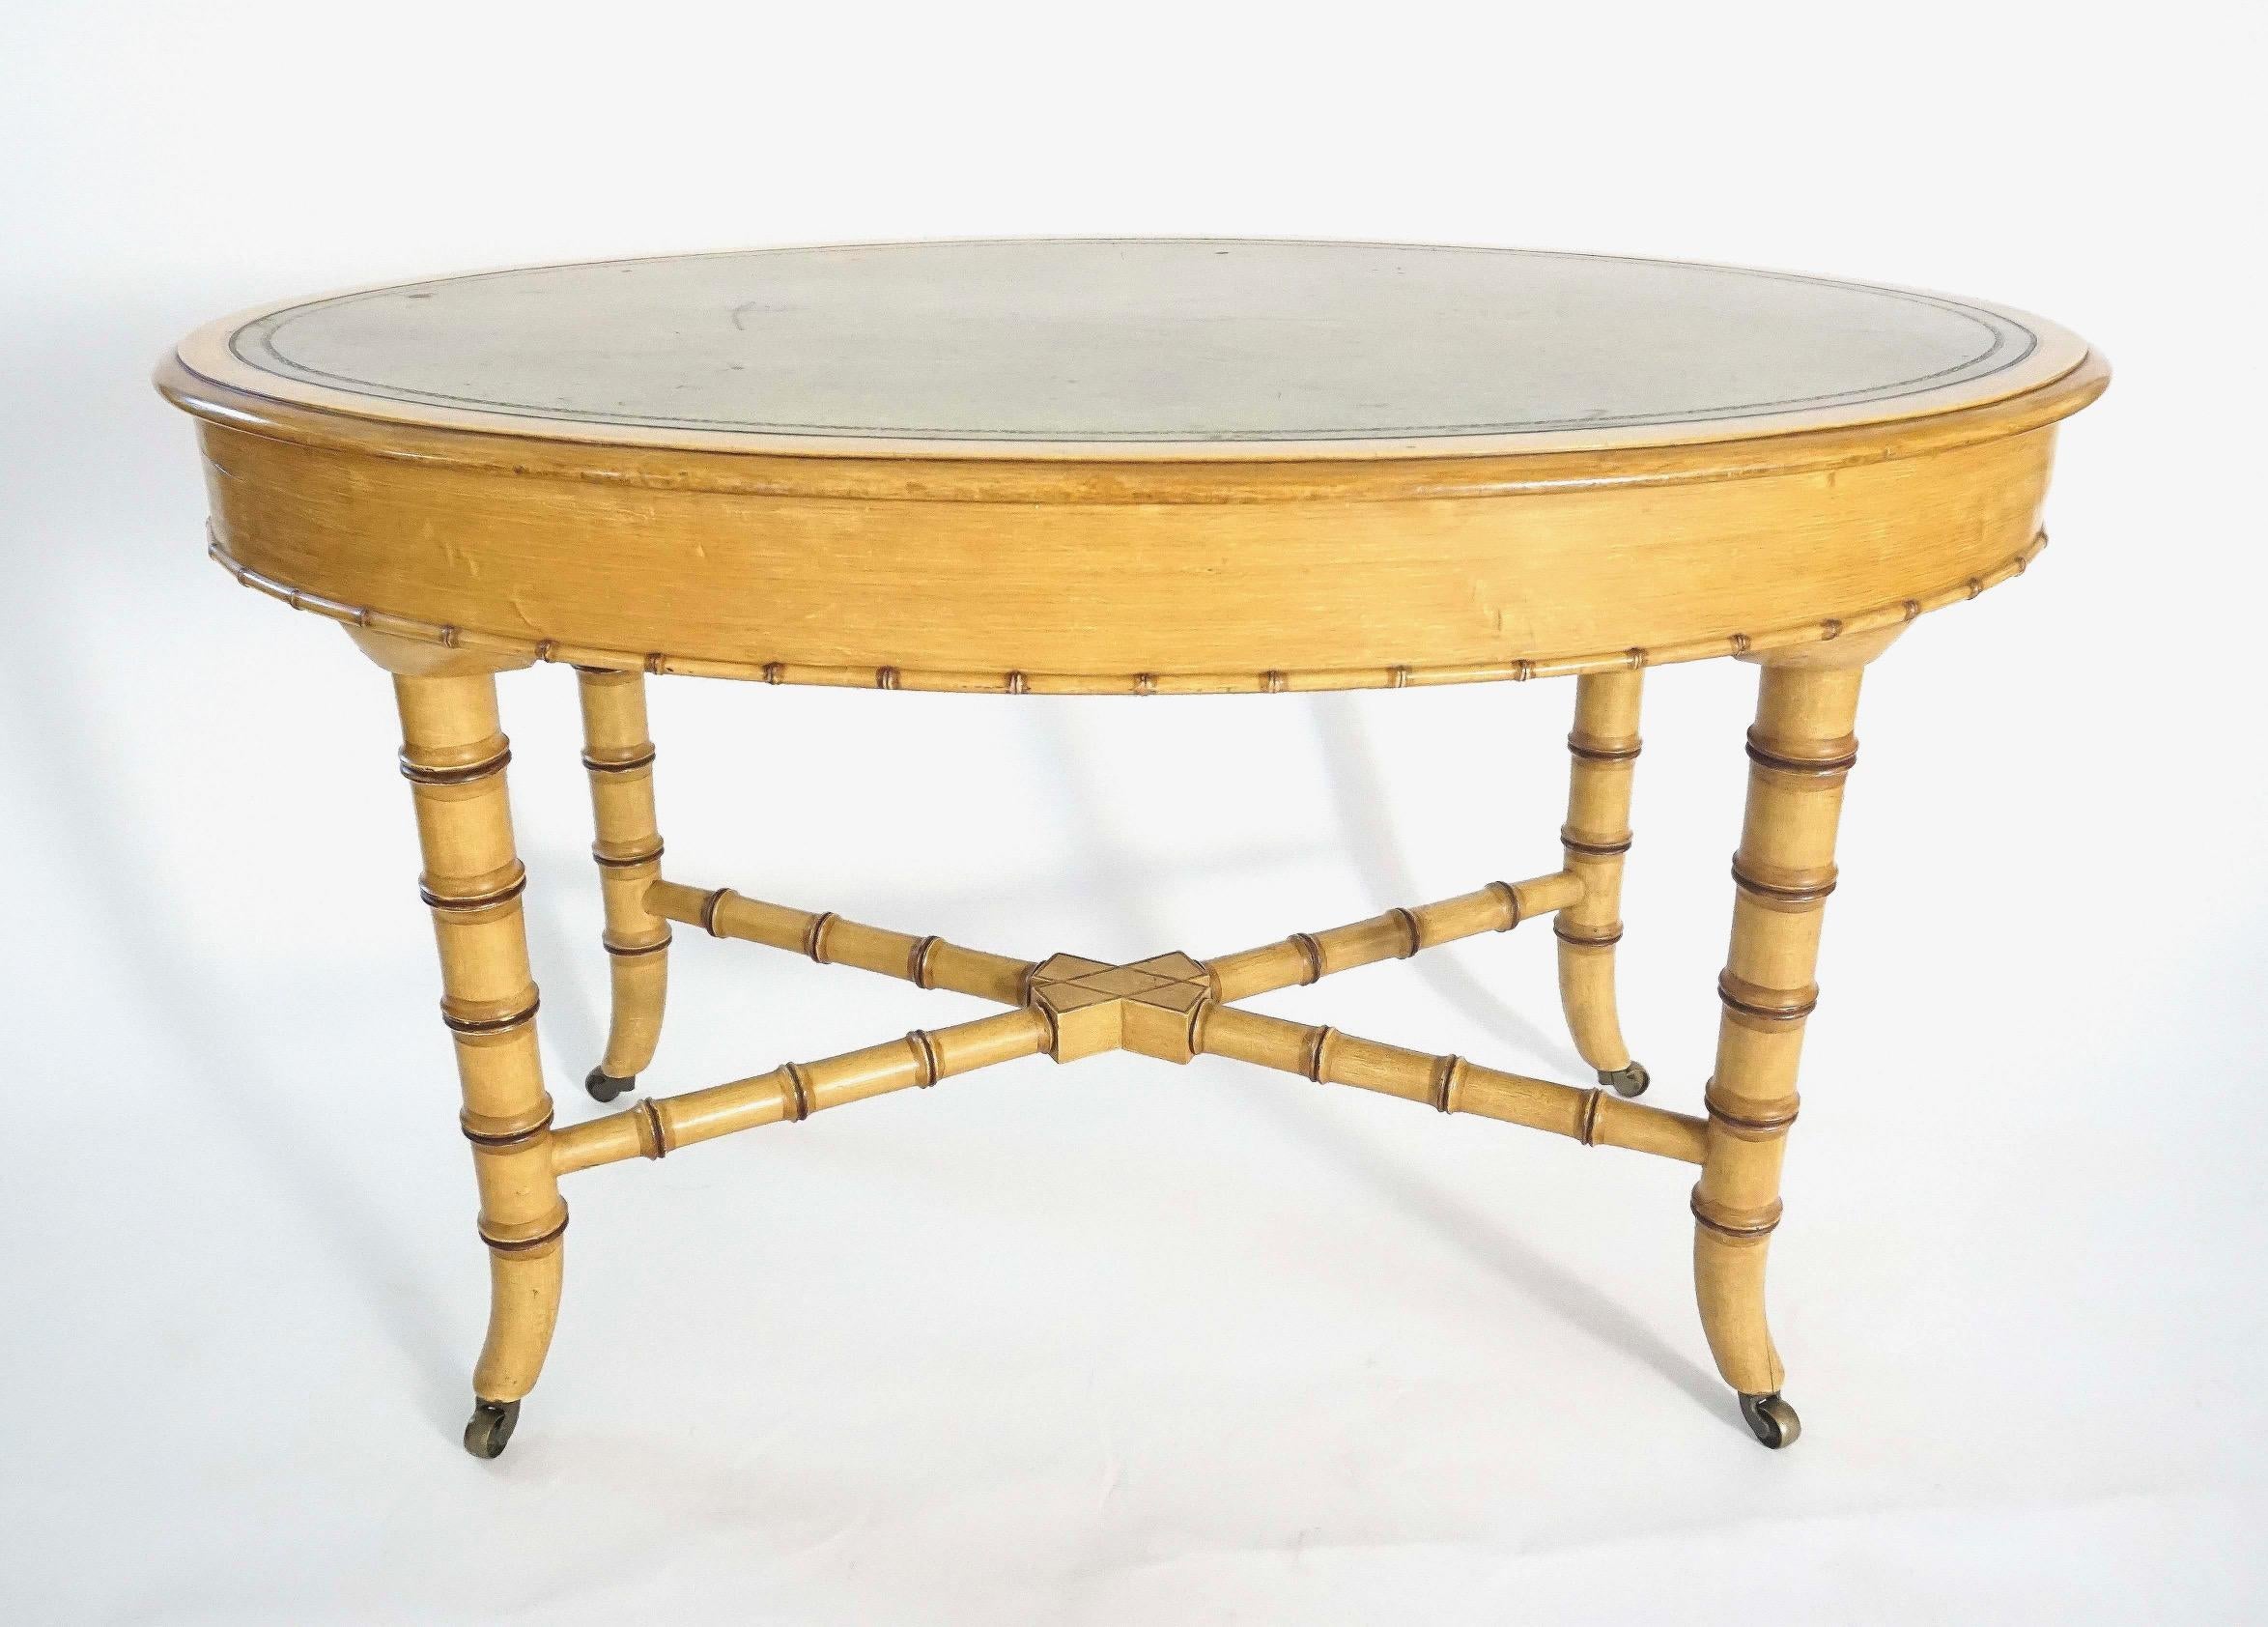 Howard & Sons London Leather Topped Faux Bamboo Writing Table, circa 1875 For Sale 2